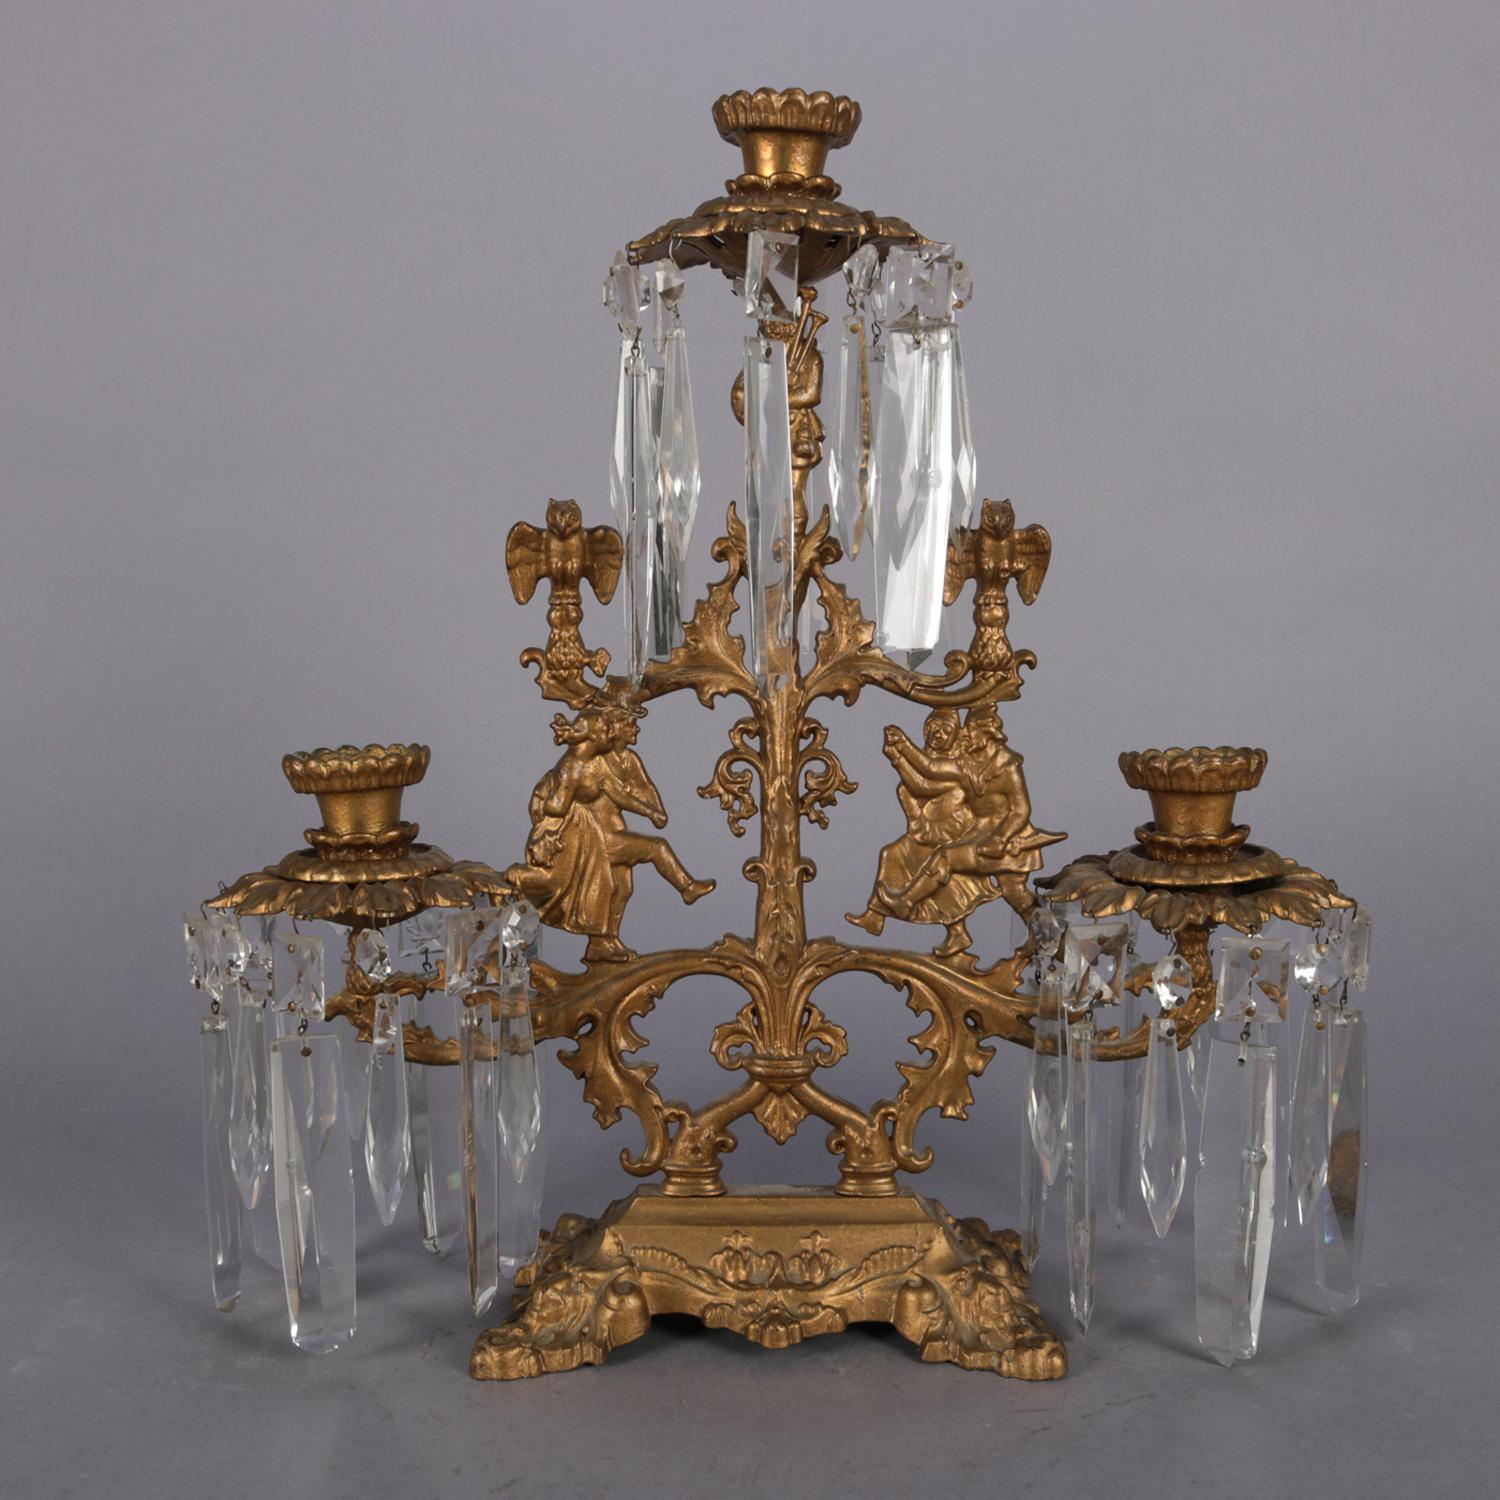 Antique French girandole candelabra features gilt cast metal construction with courting couples and foliate decoration over footed base and having three candle sockets with hanging cut crystals throughout, circa 1890.

Measures:17